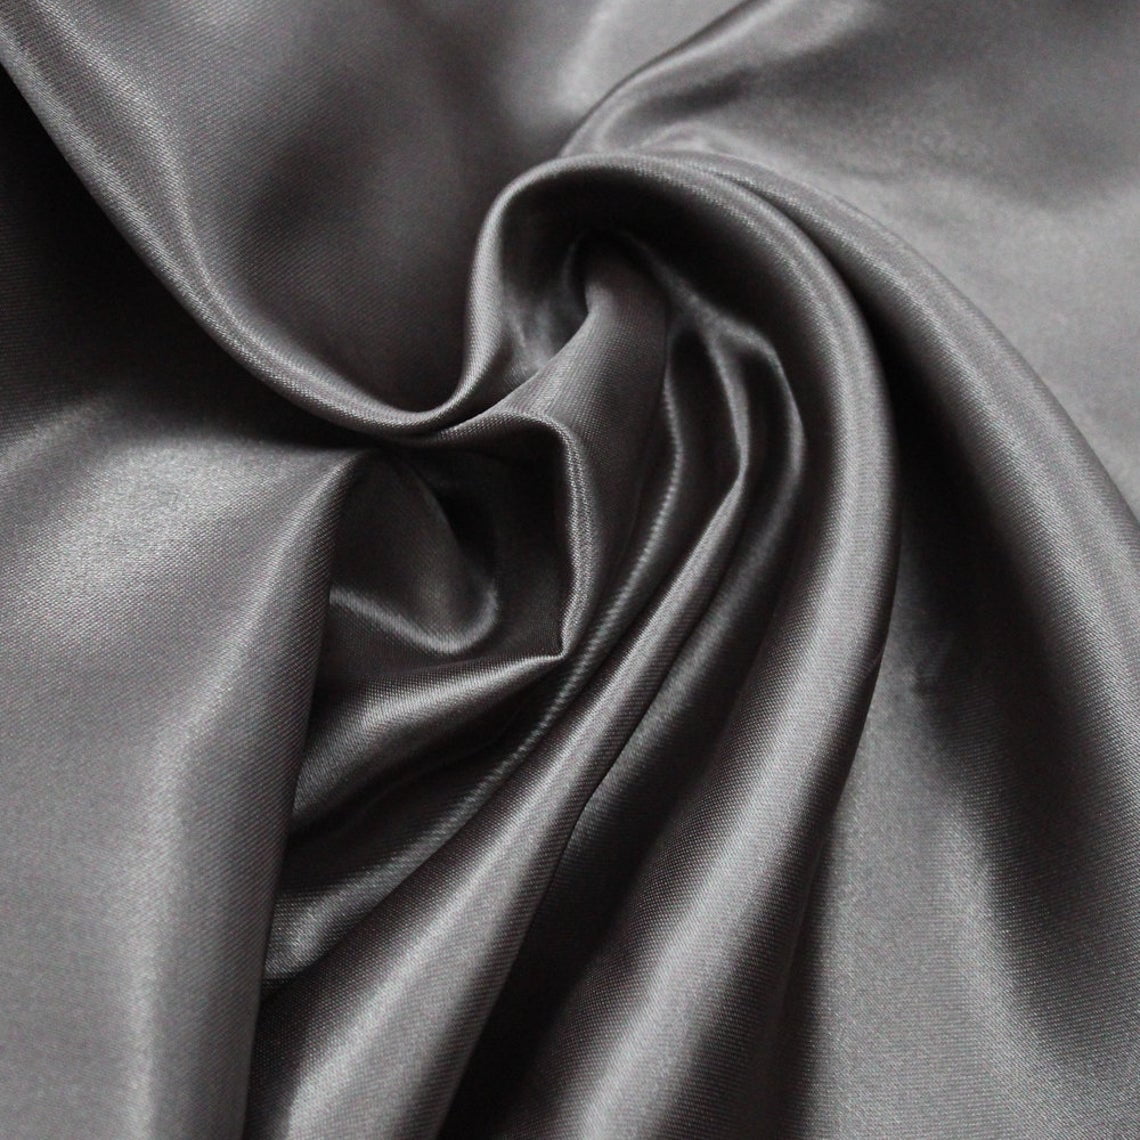 Black, 5 Yd 5 Yards Continuous Decoration Charmeuse Satin Fabric 60 Wide Fashion Crafts Bridal Silky